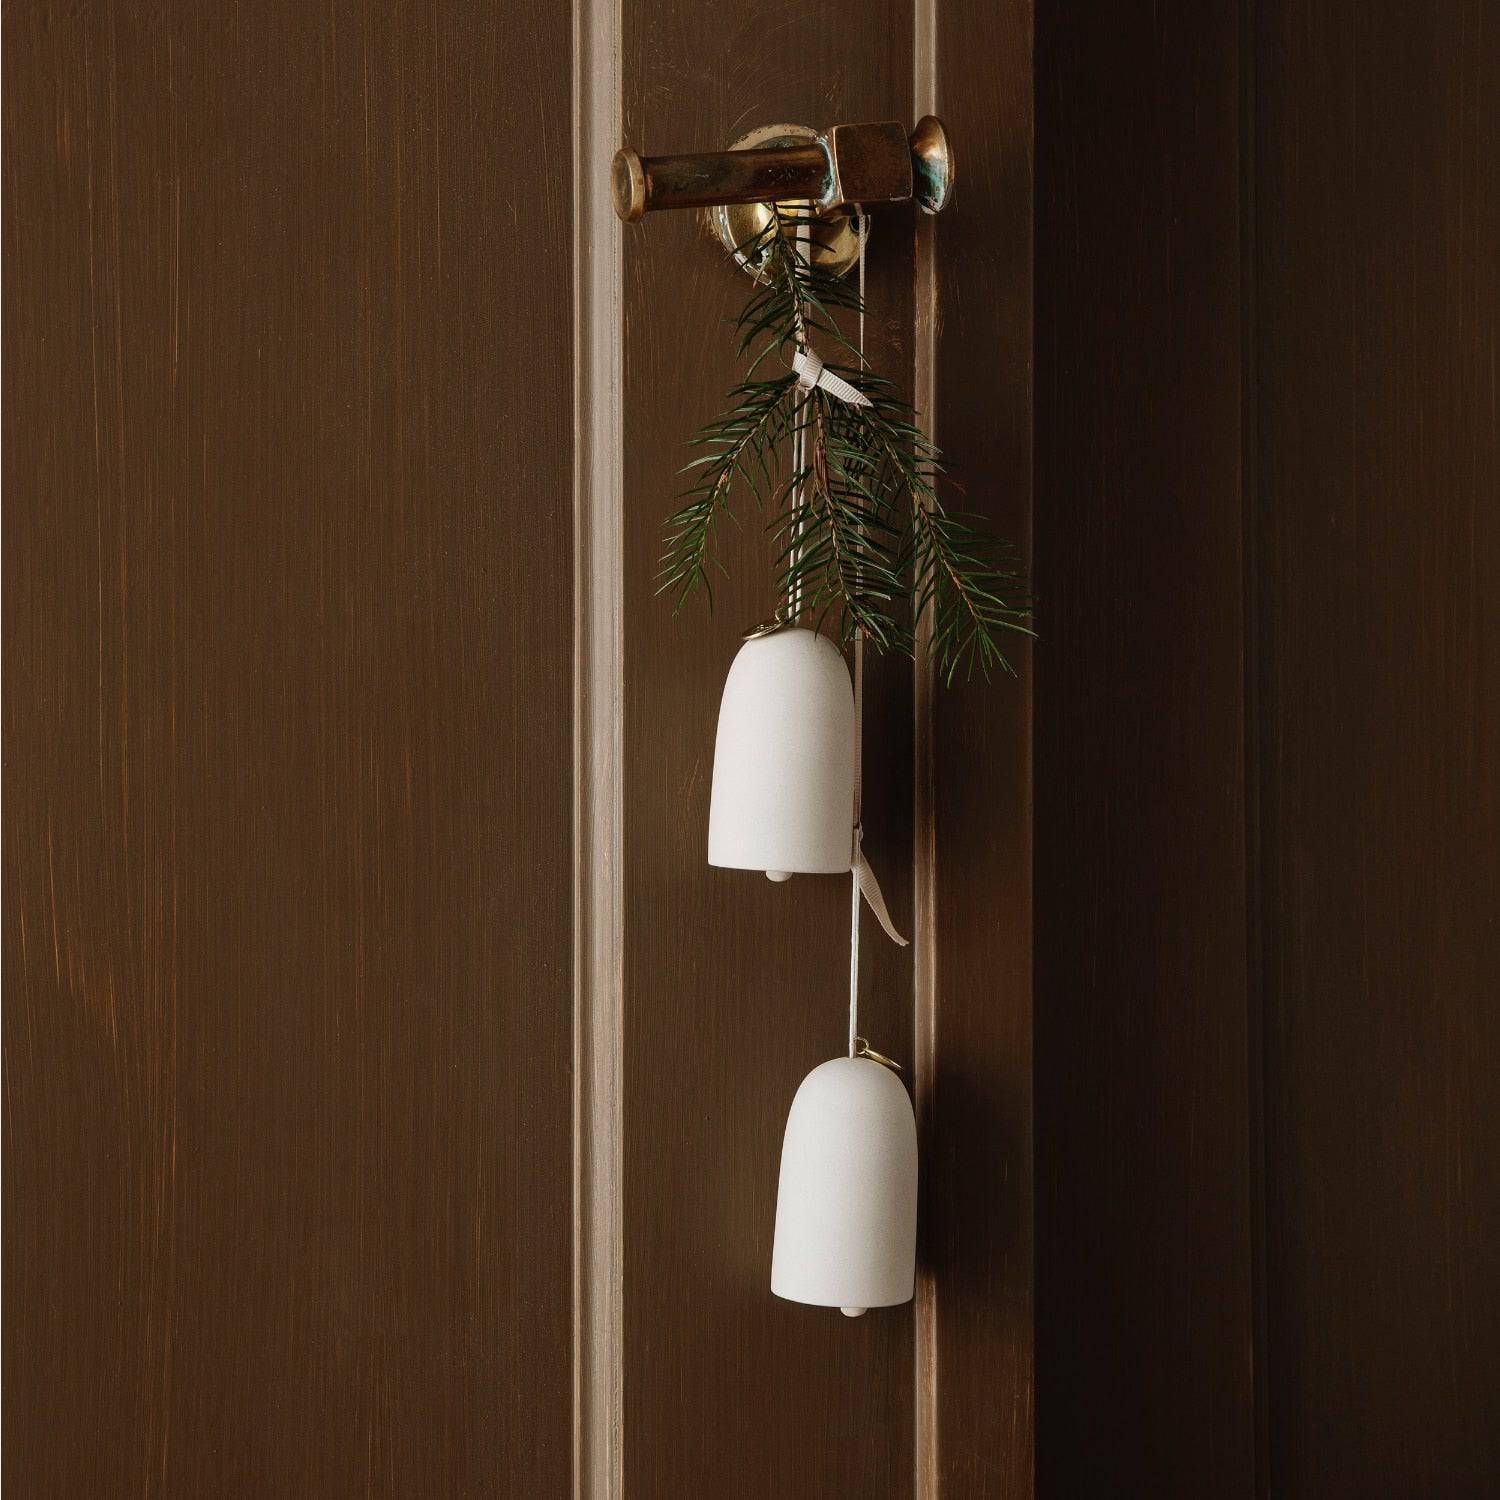 Ferm Living Bell Ceramic Ornaments - Set of 2 Off-White - KANSO